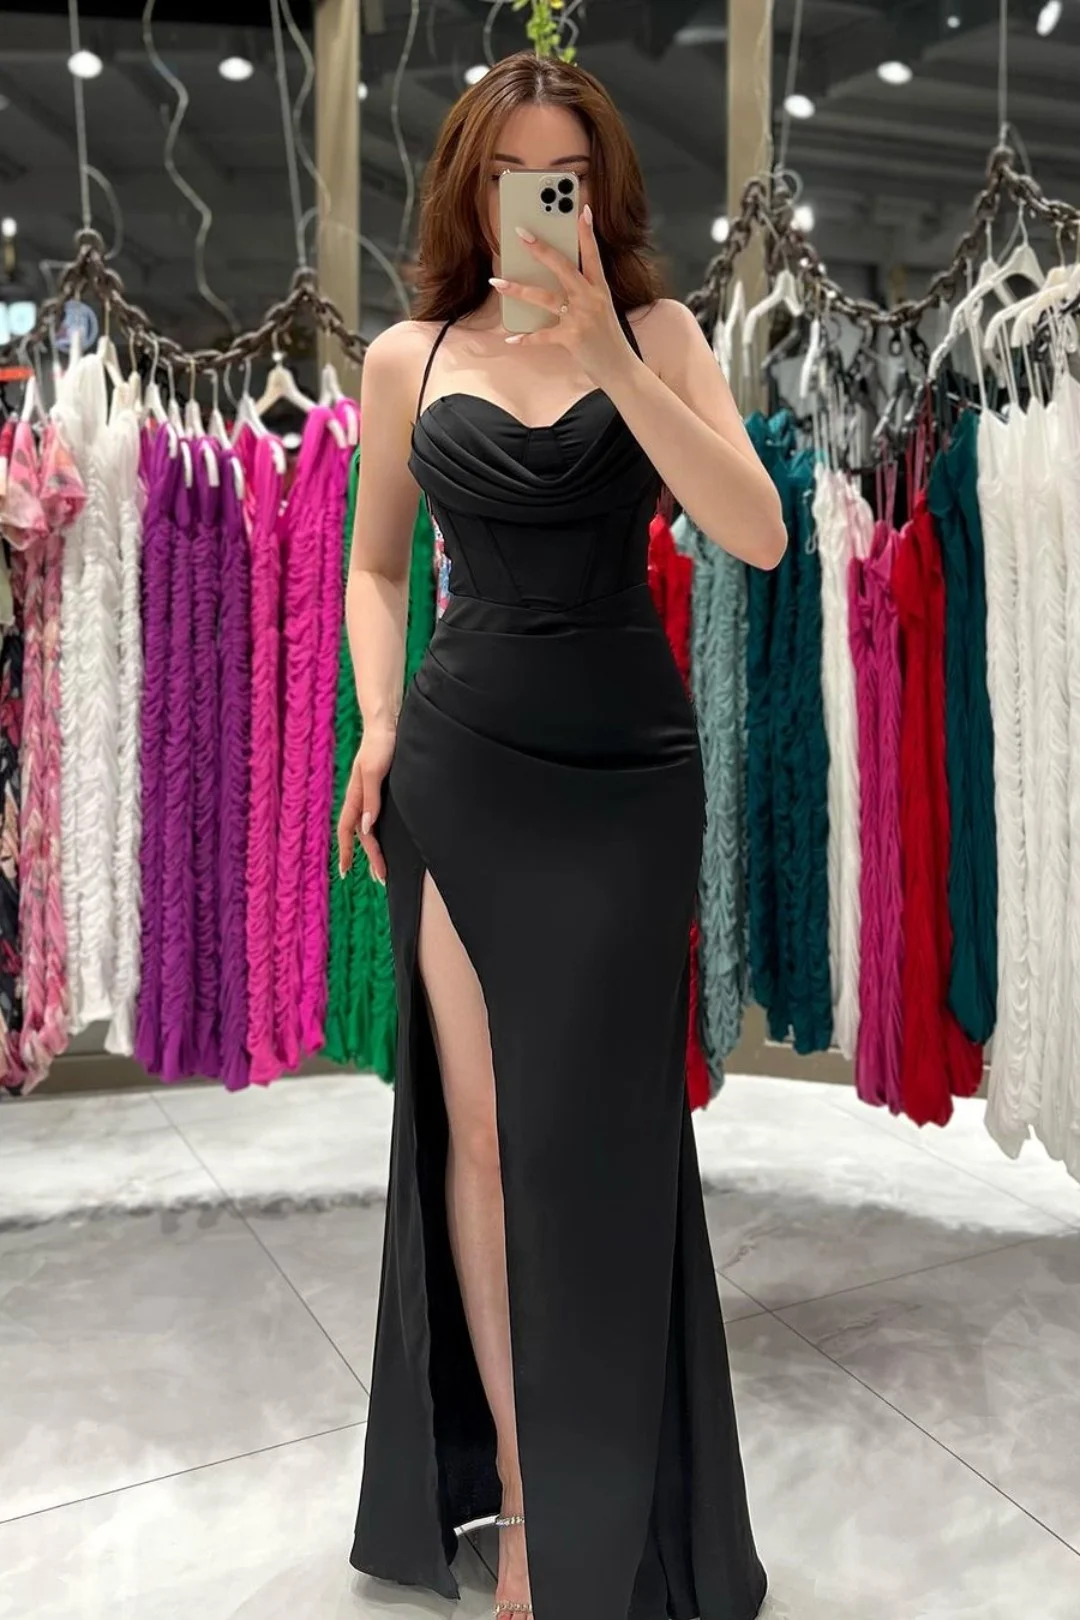 Black Evening Dress Gown Spaghetti Strap With High Slit YL0247